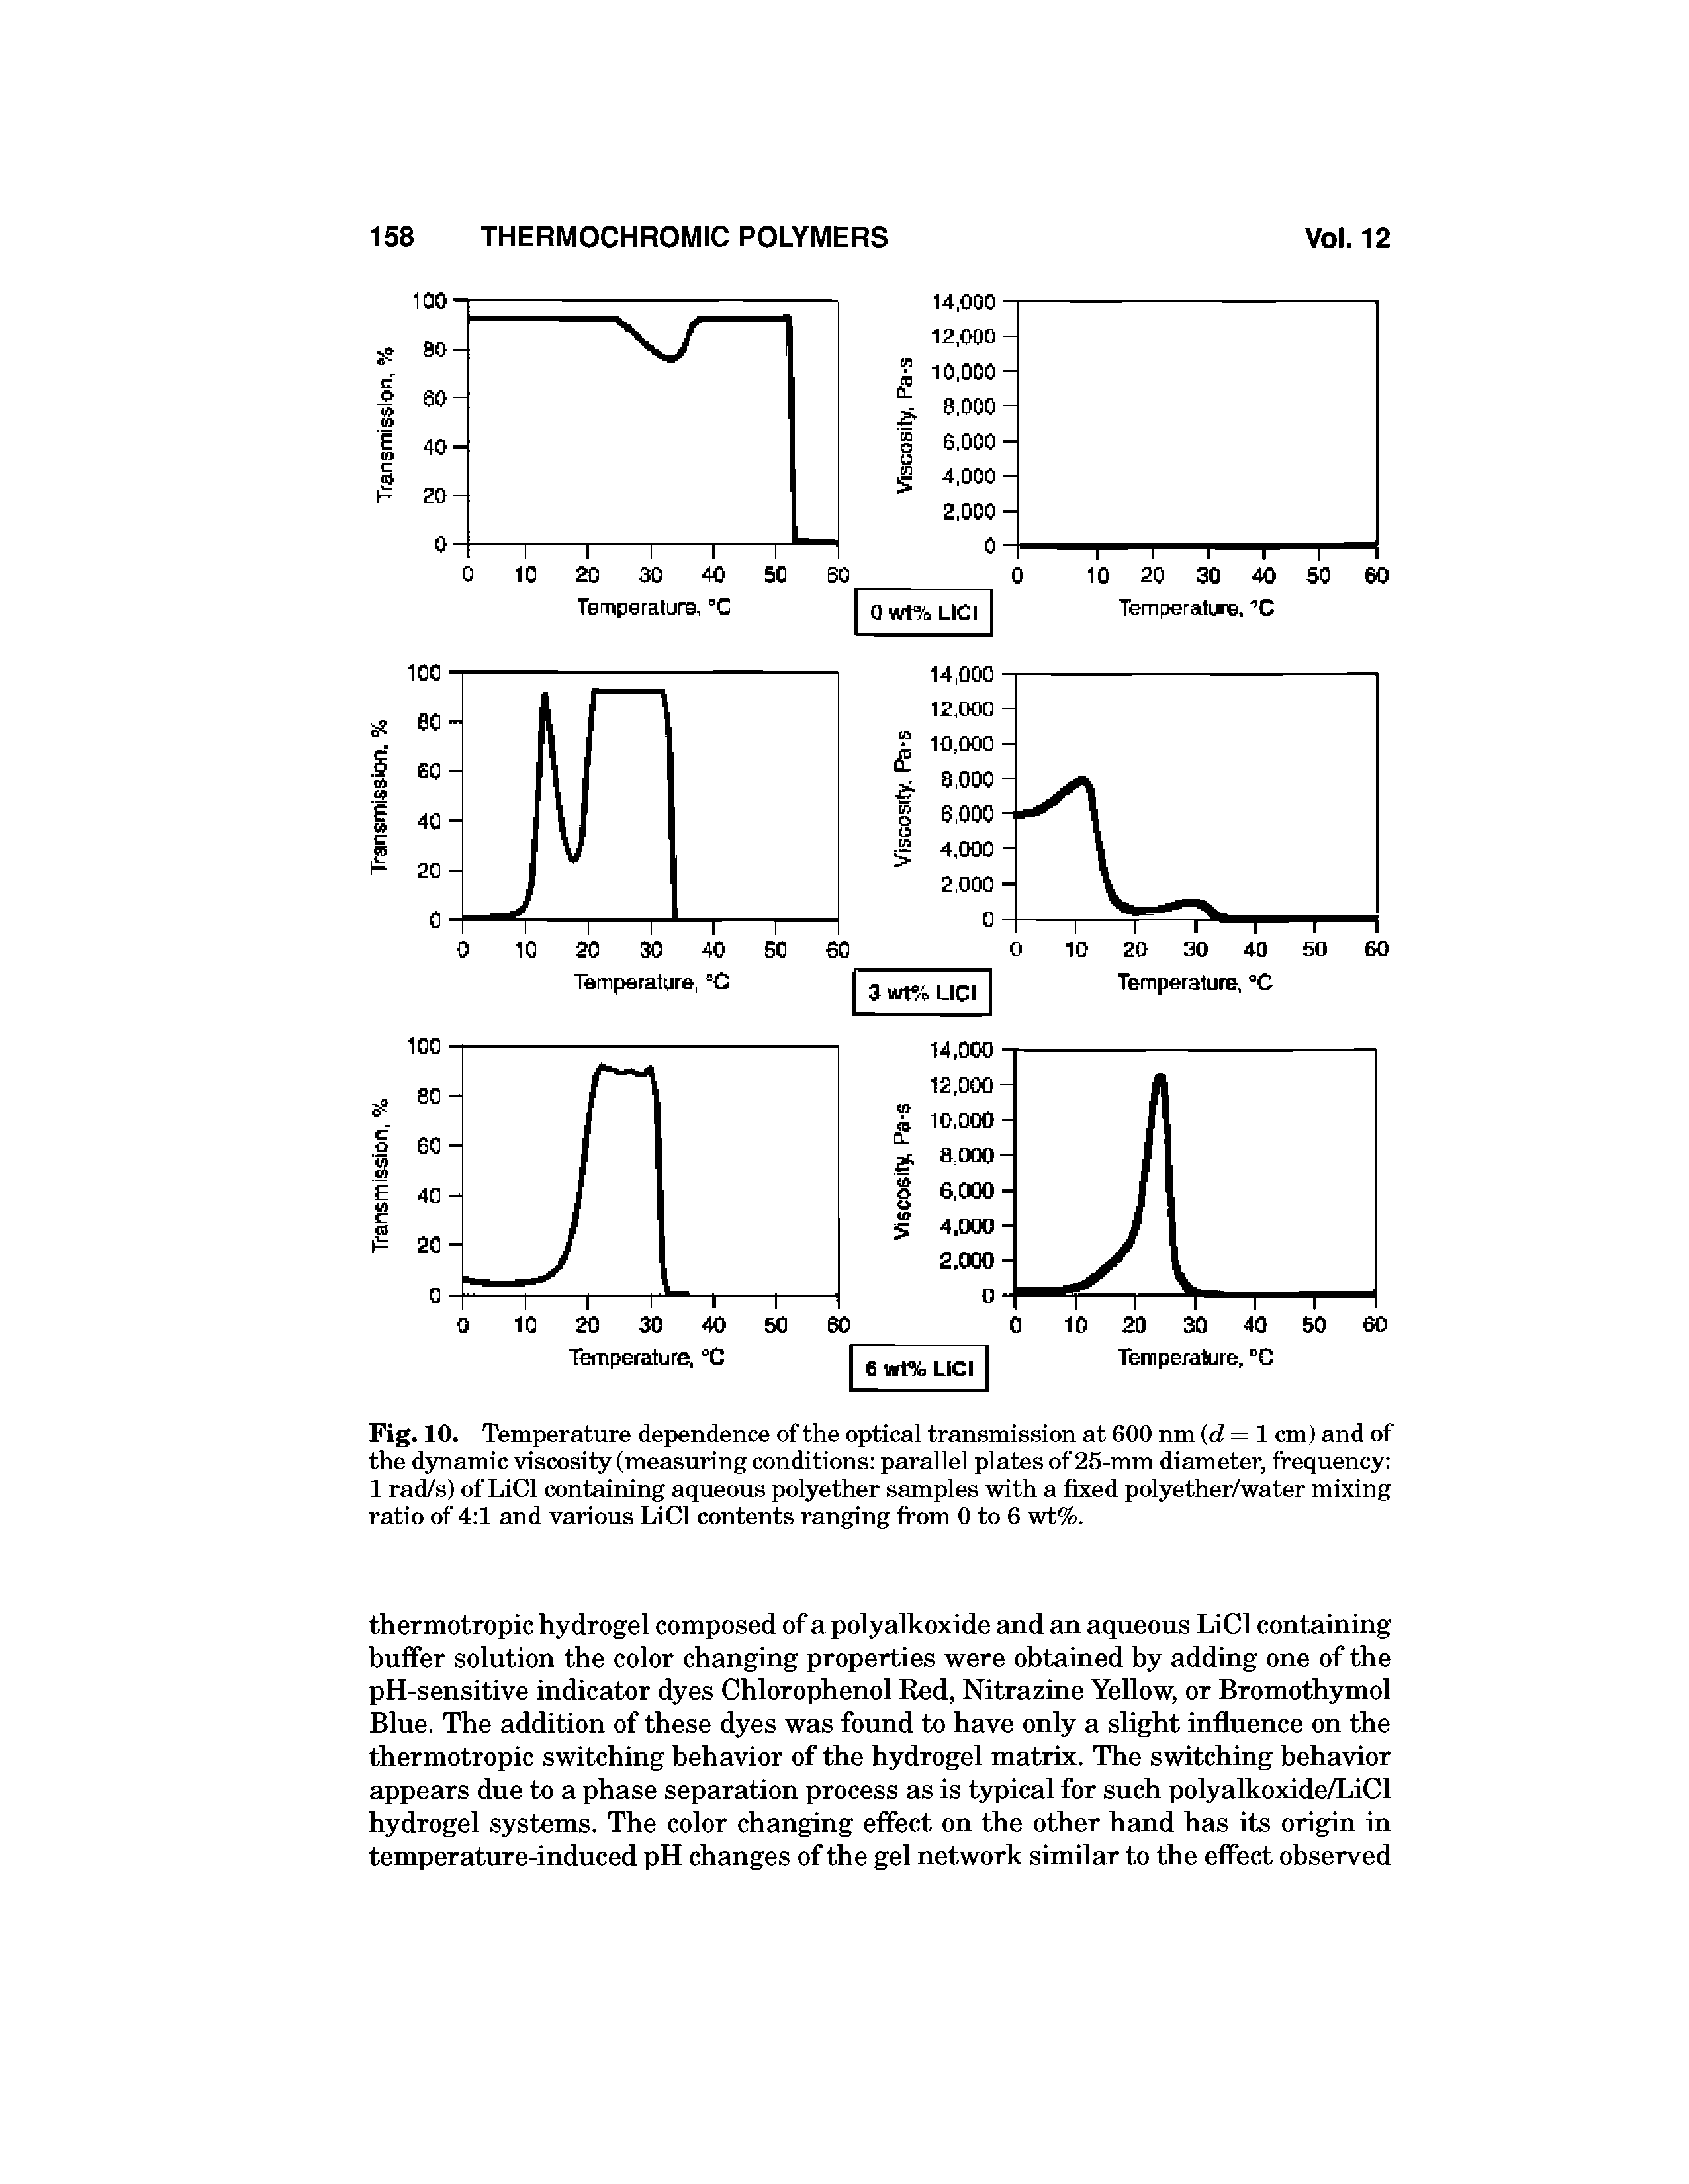 Fig. 10. Temperature dependence of the optical transmission at 600 nm (d=l cm) and of the dynamic viscosity (measuring conditions parallel plates of 25-mm diameter, frequency 1 rad/s) of LiCl containing aqueous polyether samples with a fixed polyether/water mixing ratio of 4 1 and various LiCl contents ranging from 0 to 6 wt%.